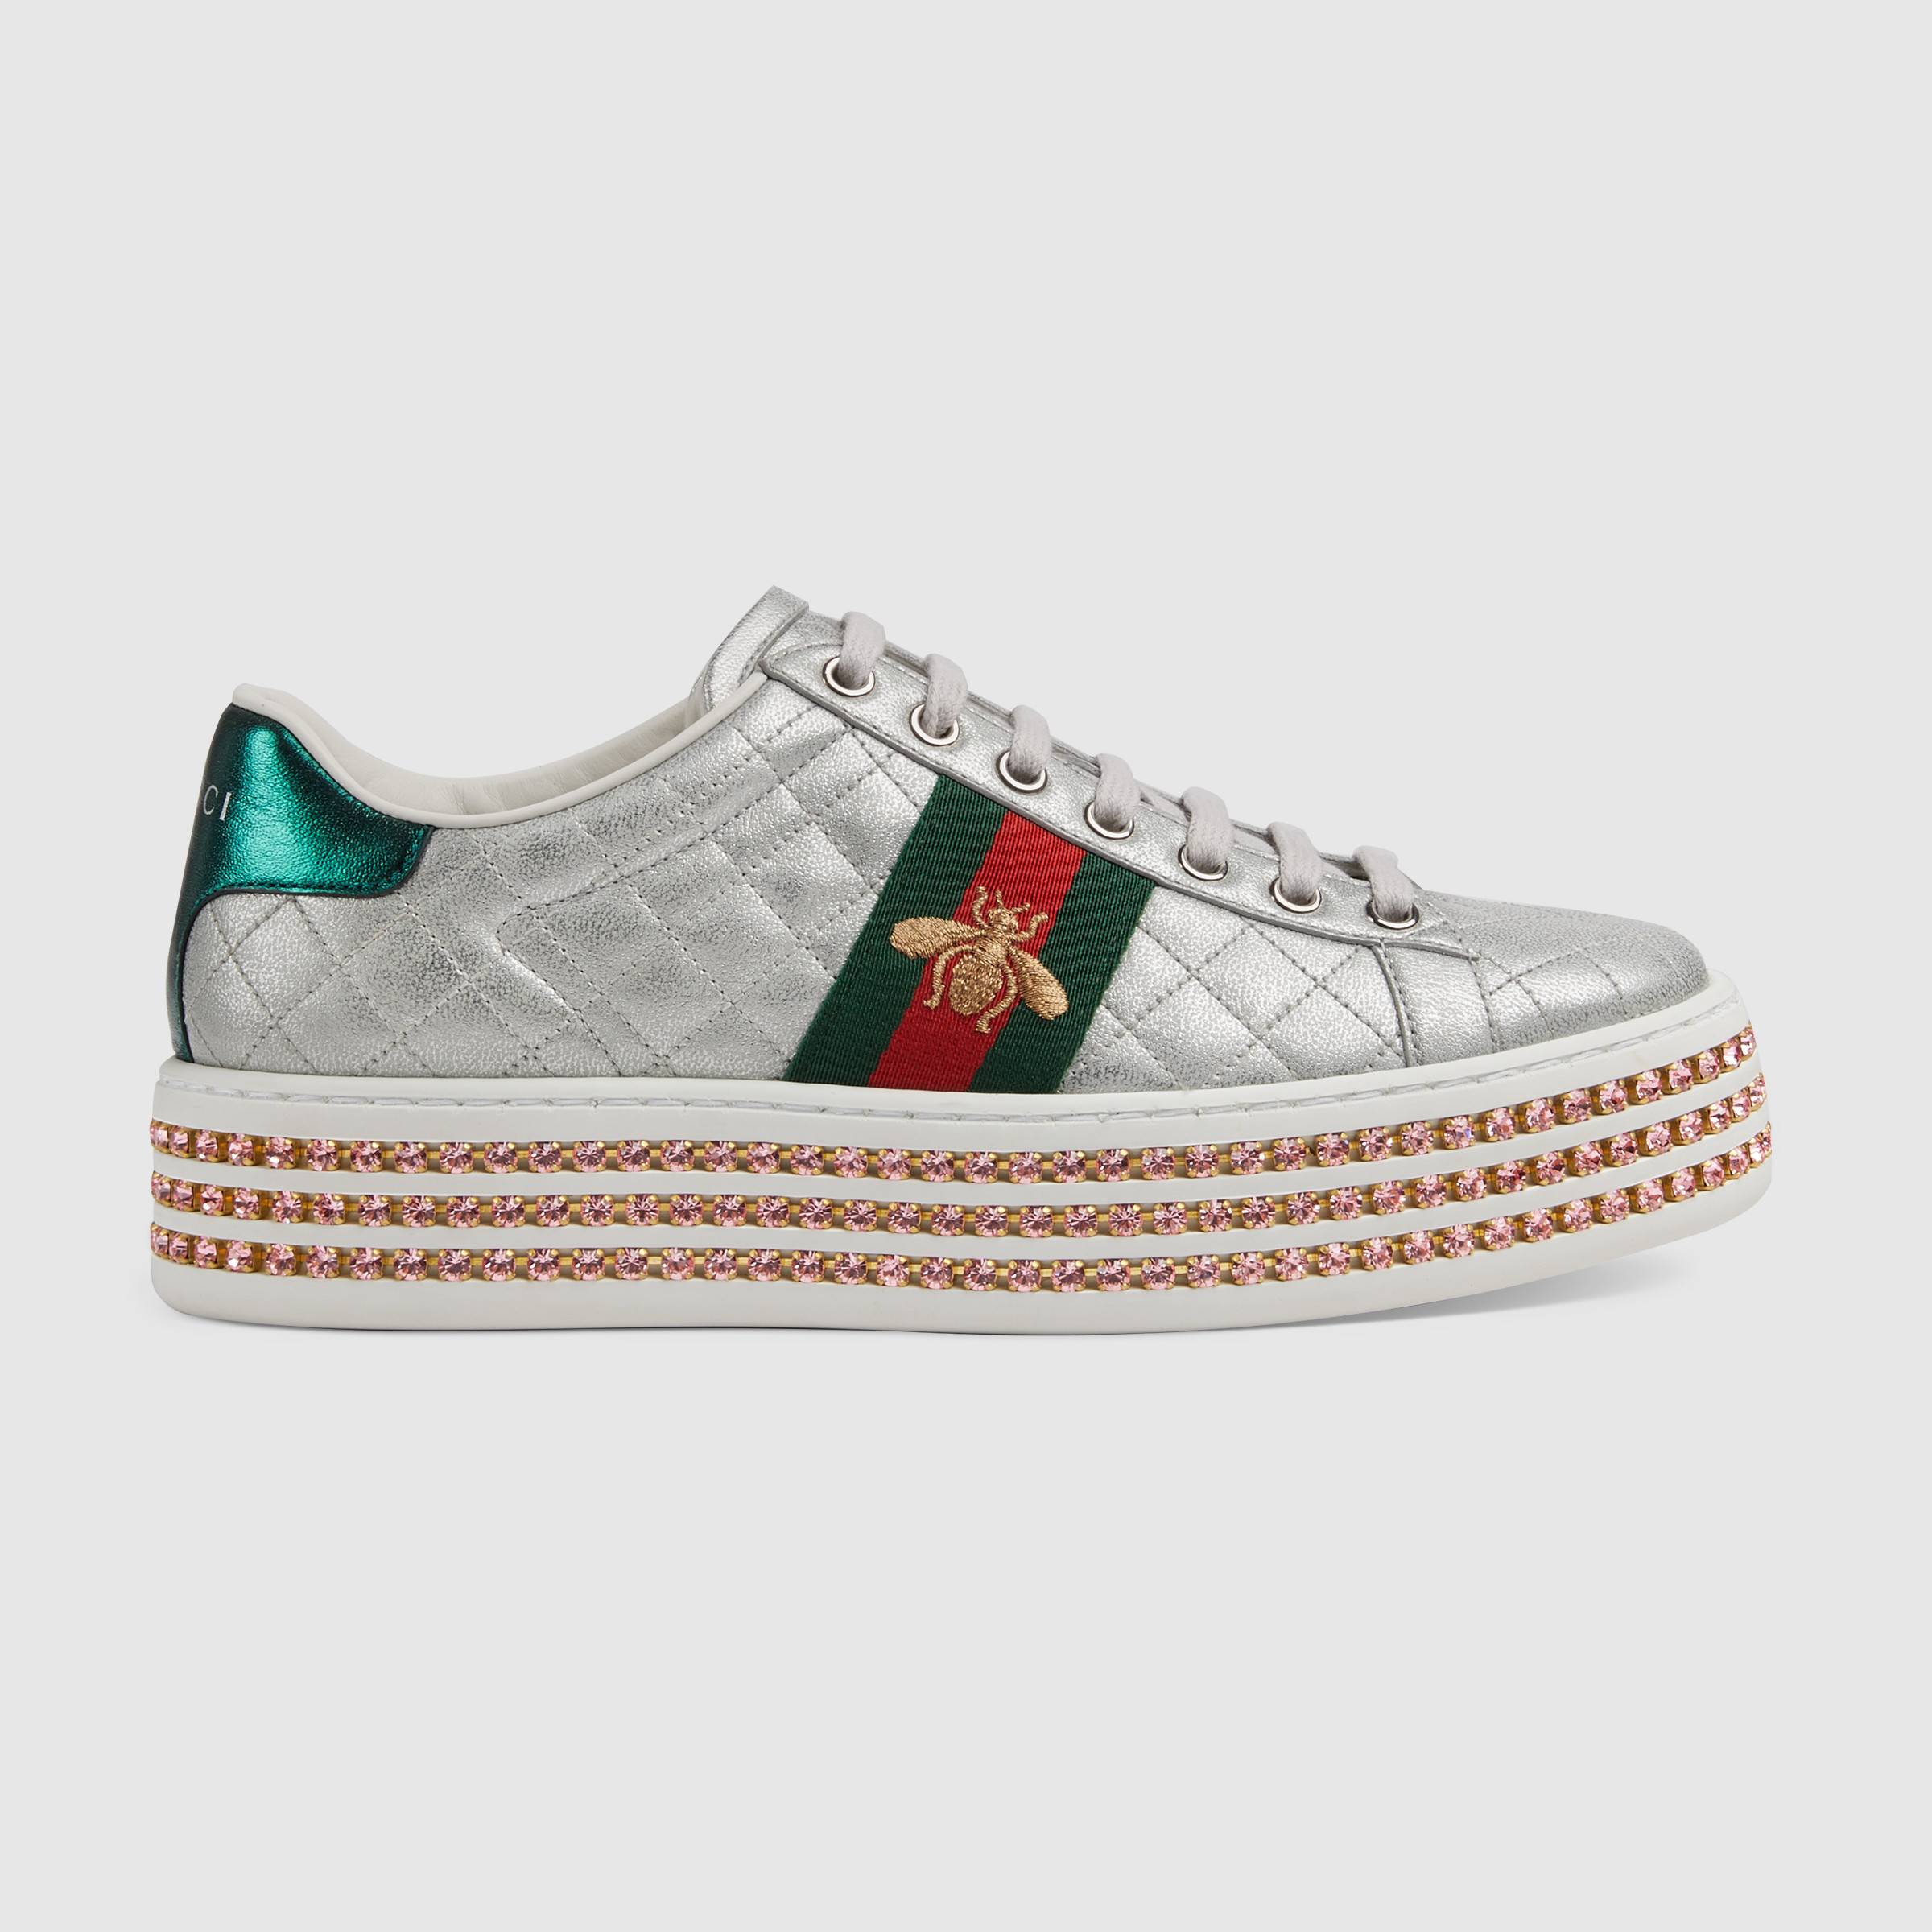 Ace sneaker with crystals_02